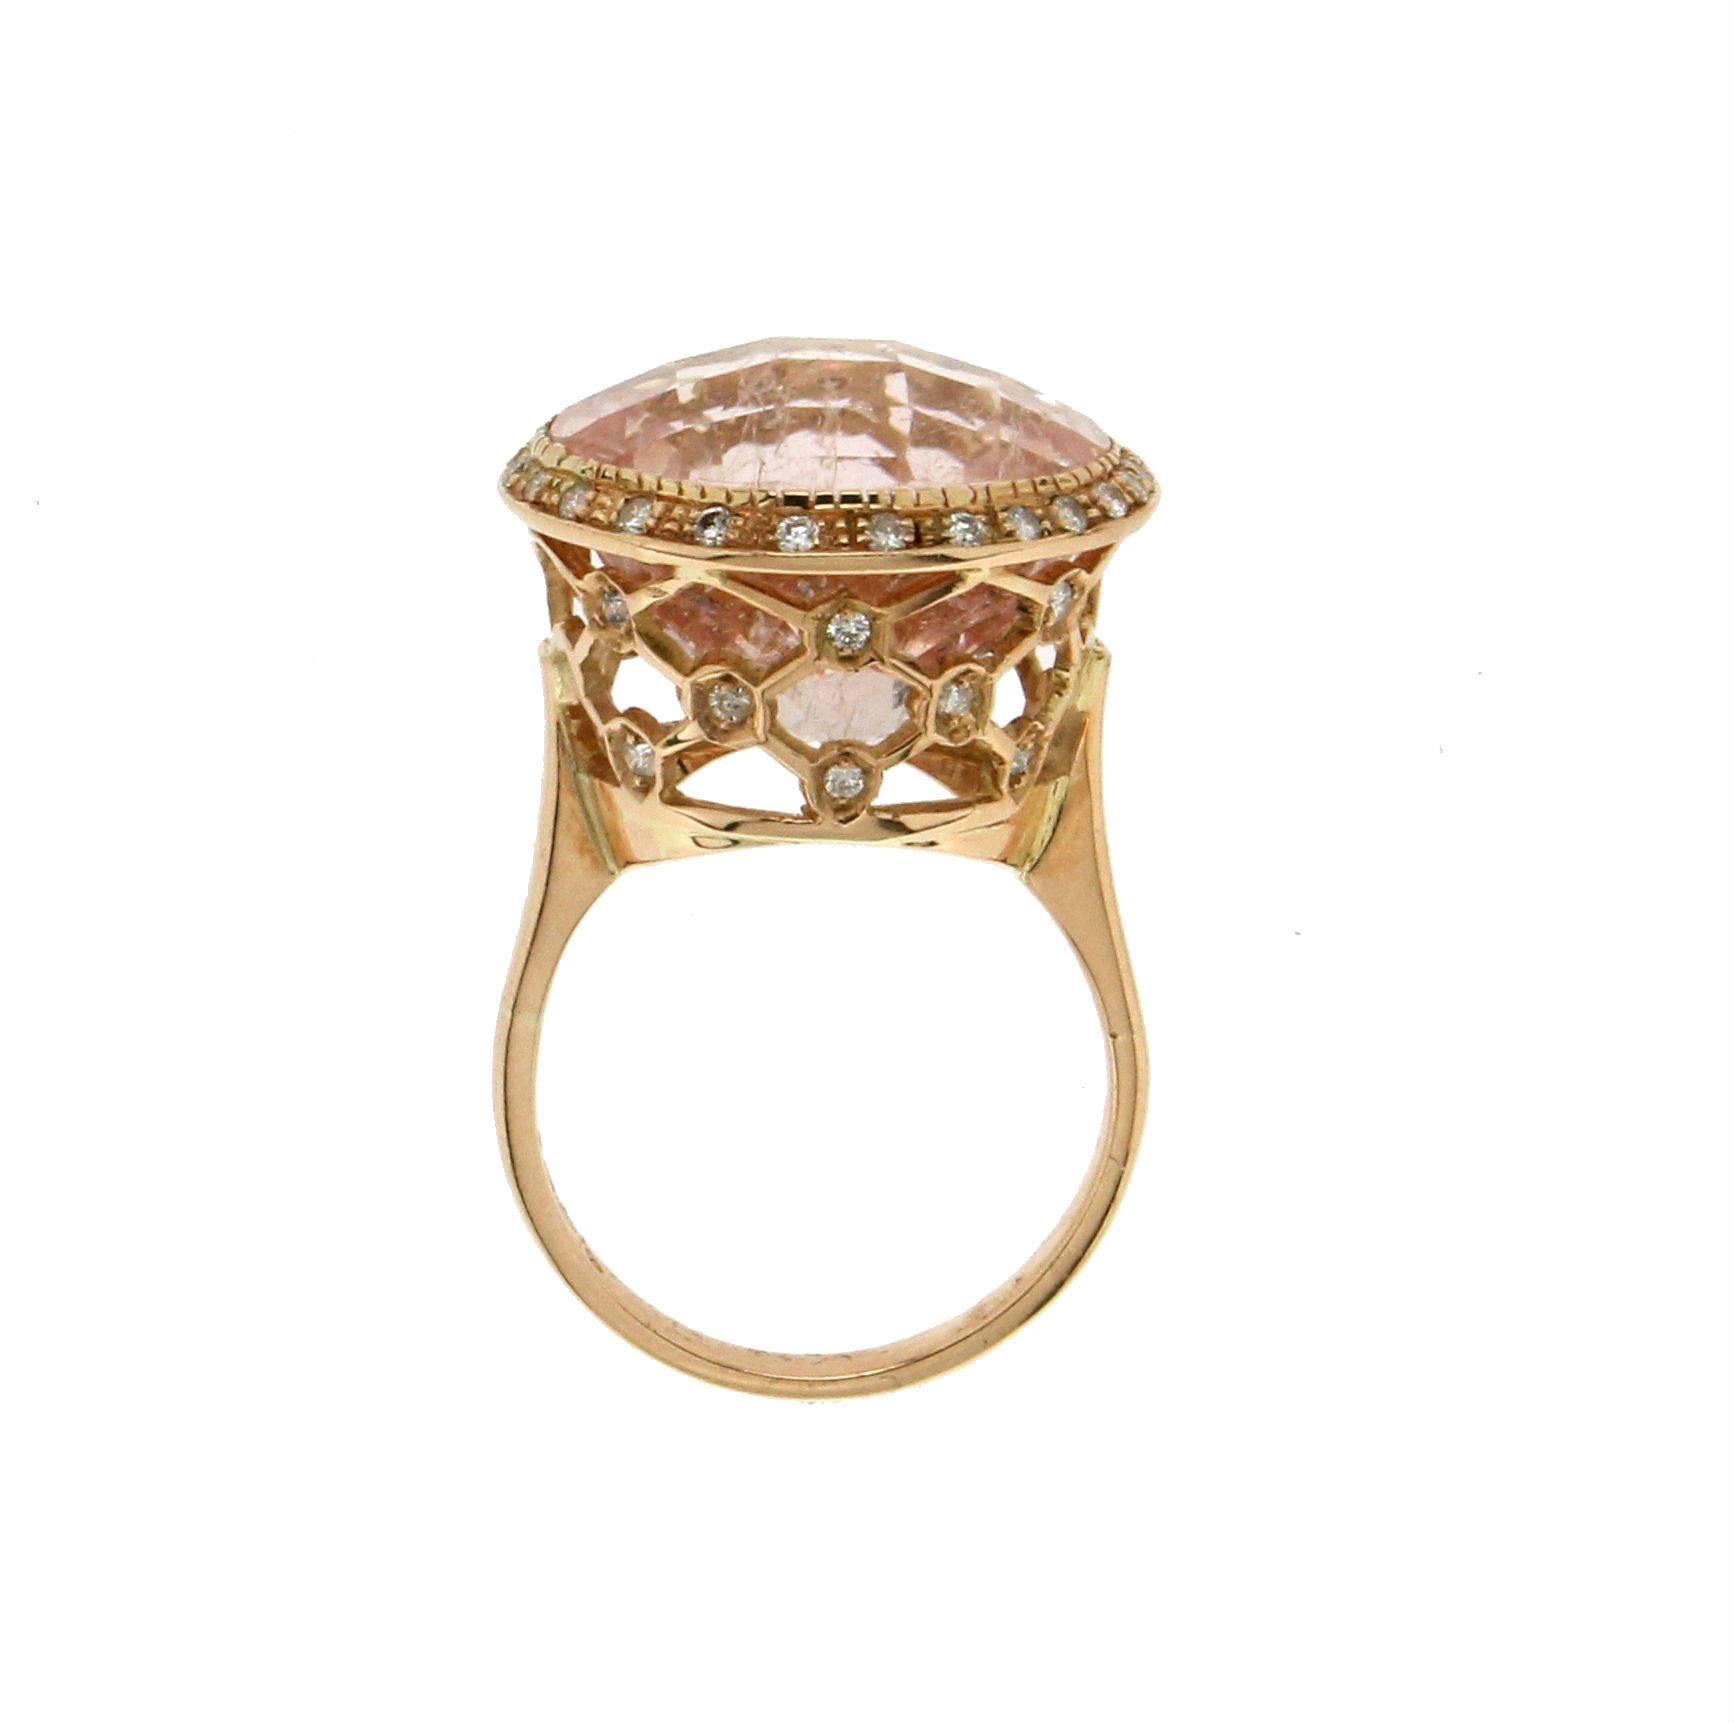 Fantastic 18 karat yellow gold ring mounted with morganite and diamonds

Ring Weight 11.80 grams
Diamonds Weight 0.51 karat
Morganite 24.29 karat
Ring Size 8.5 us
Diameter 1,85 cm 0,72 inch 
